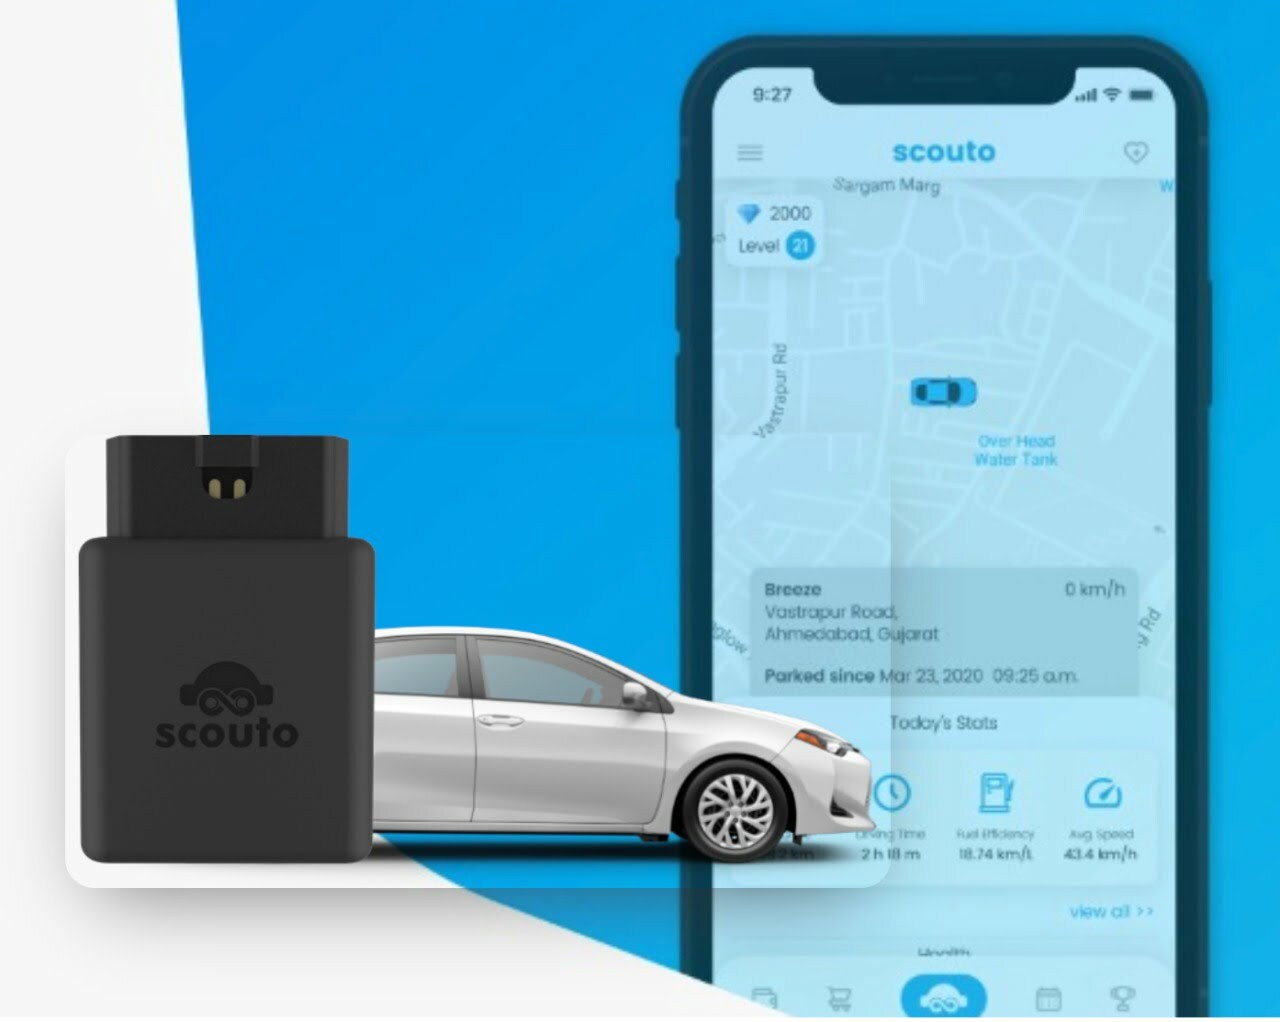 Spinny Acquires Scouto - 100% stake in AI-powered Connected Car Startup